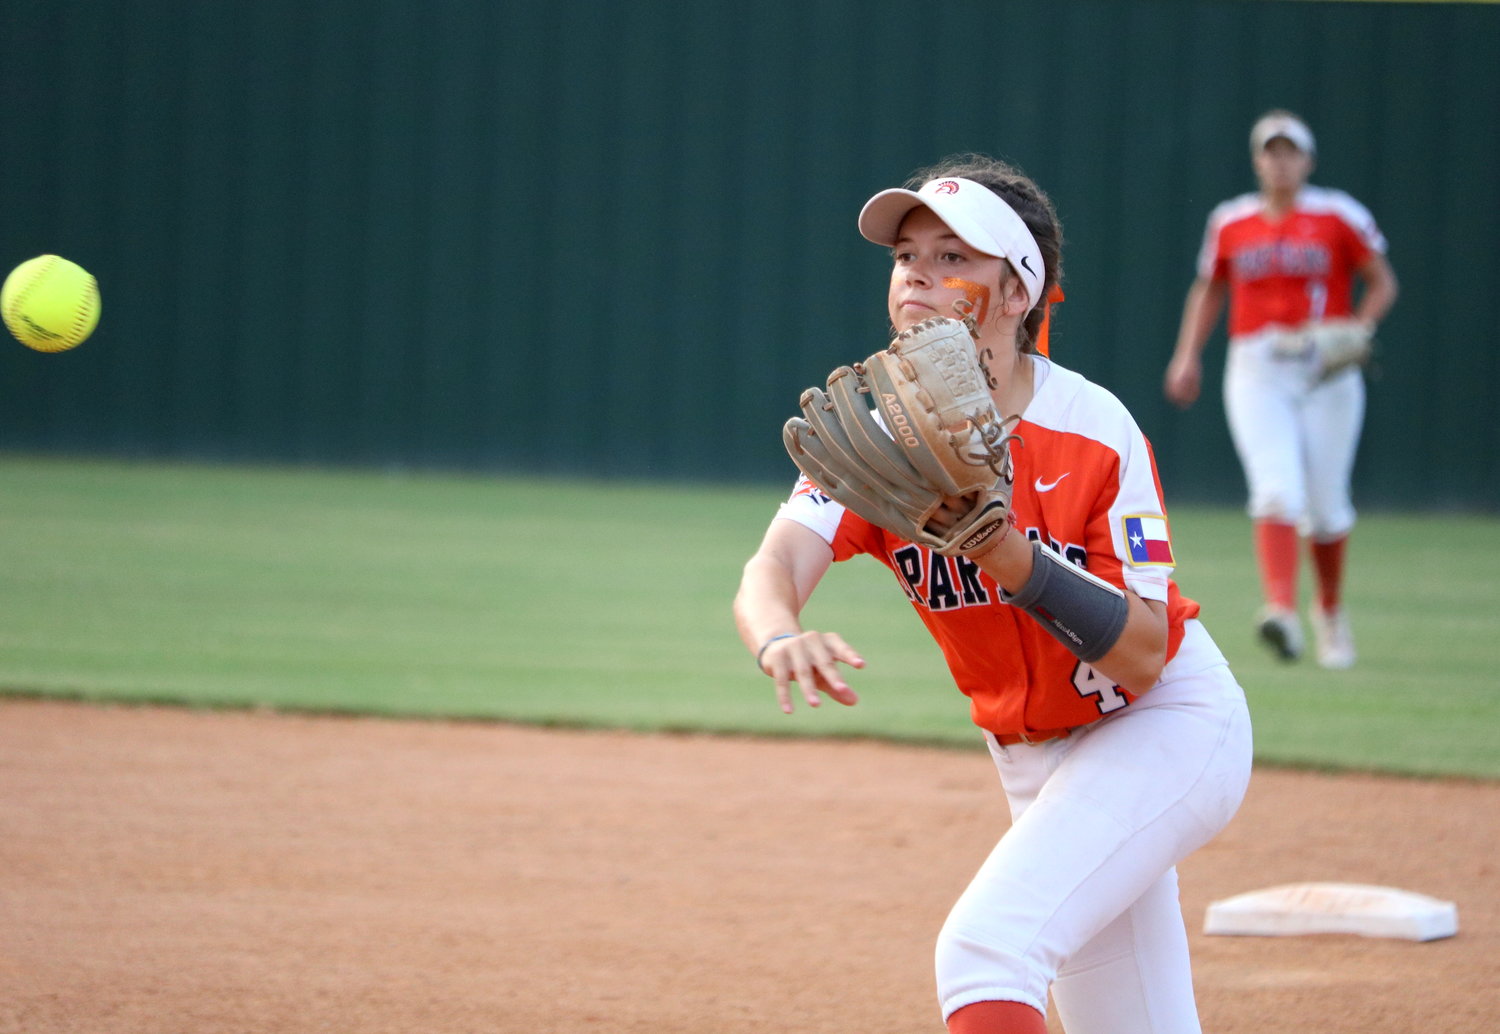 Haley Welch makes a throw to first base during Friday’s Class 6A Regional Semifinal between Seven Lakes and Deer Park at the Summer Creek softball field.